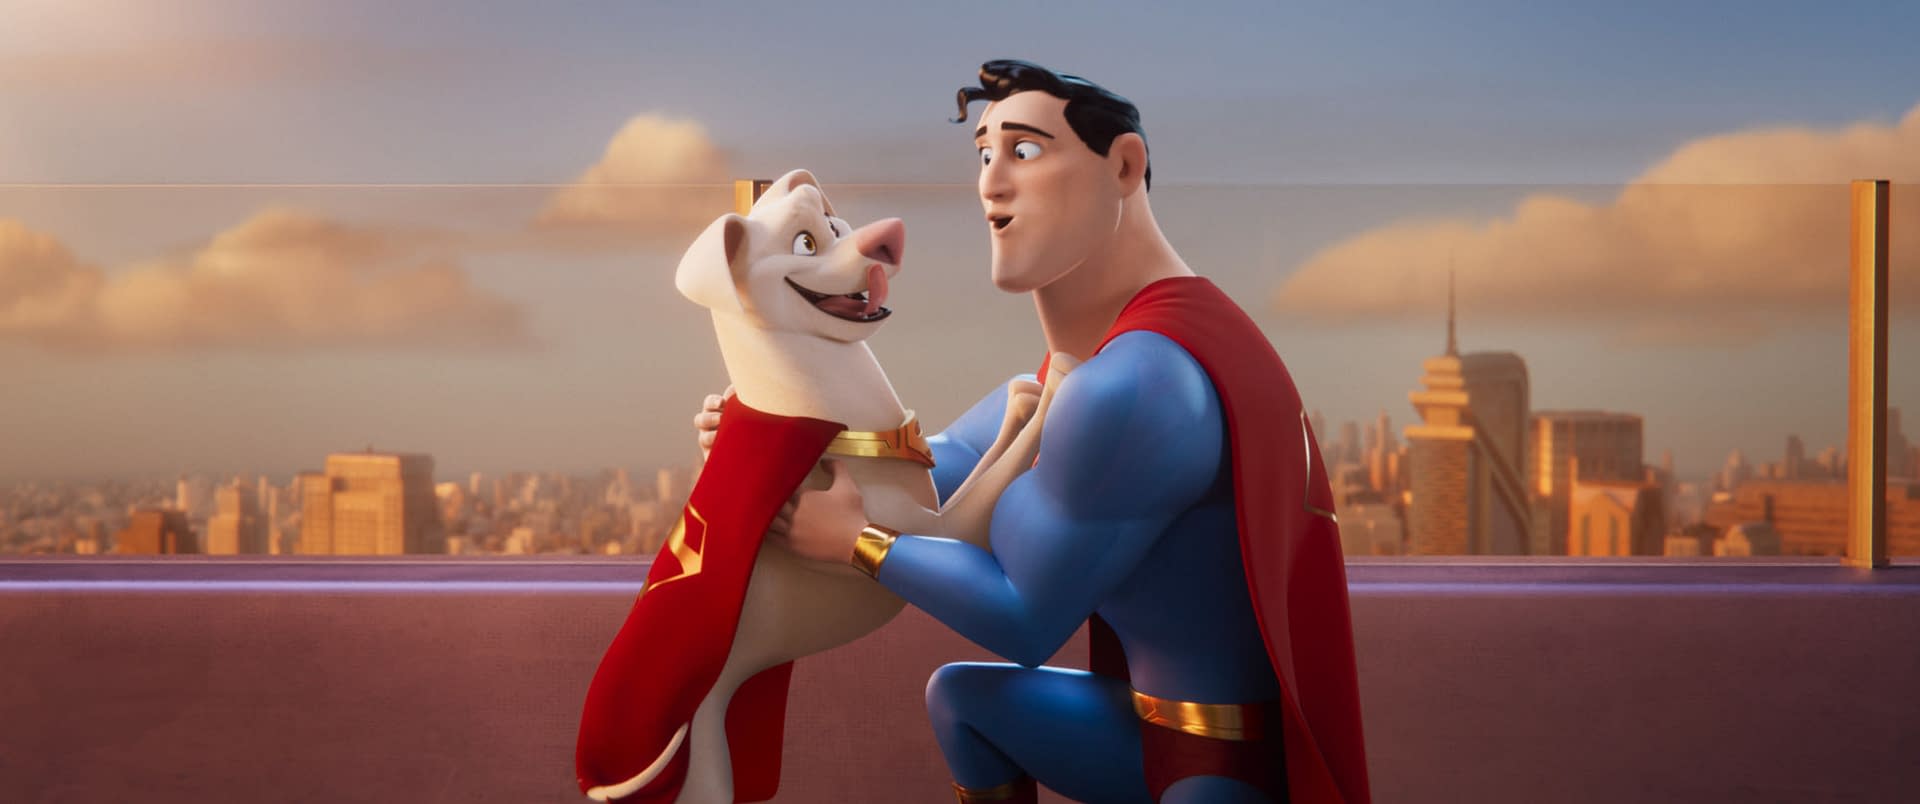 New DC League of Super-Pets Trailer Channels Saturday Morning Cartoons